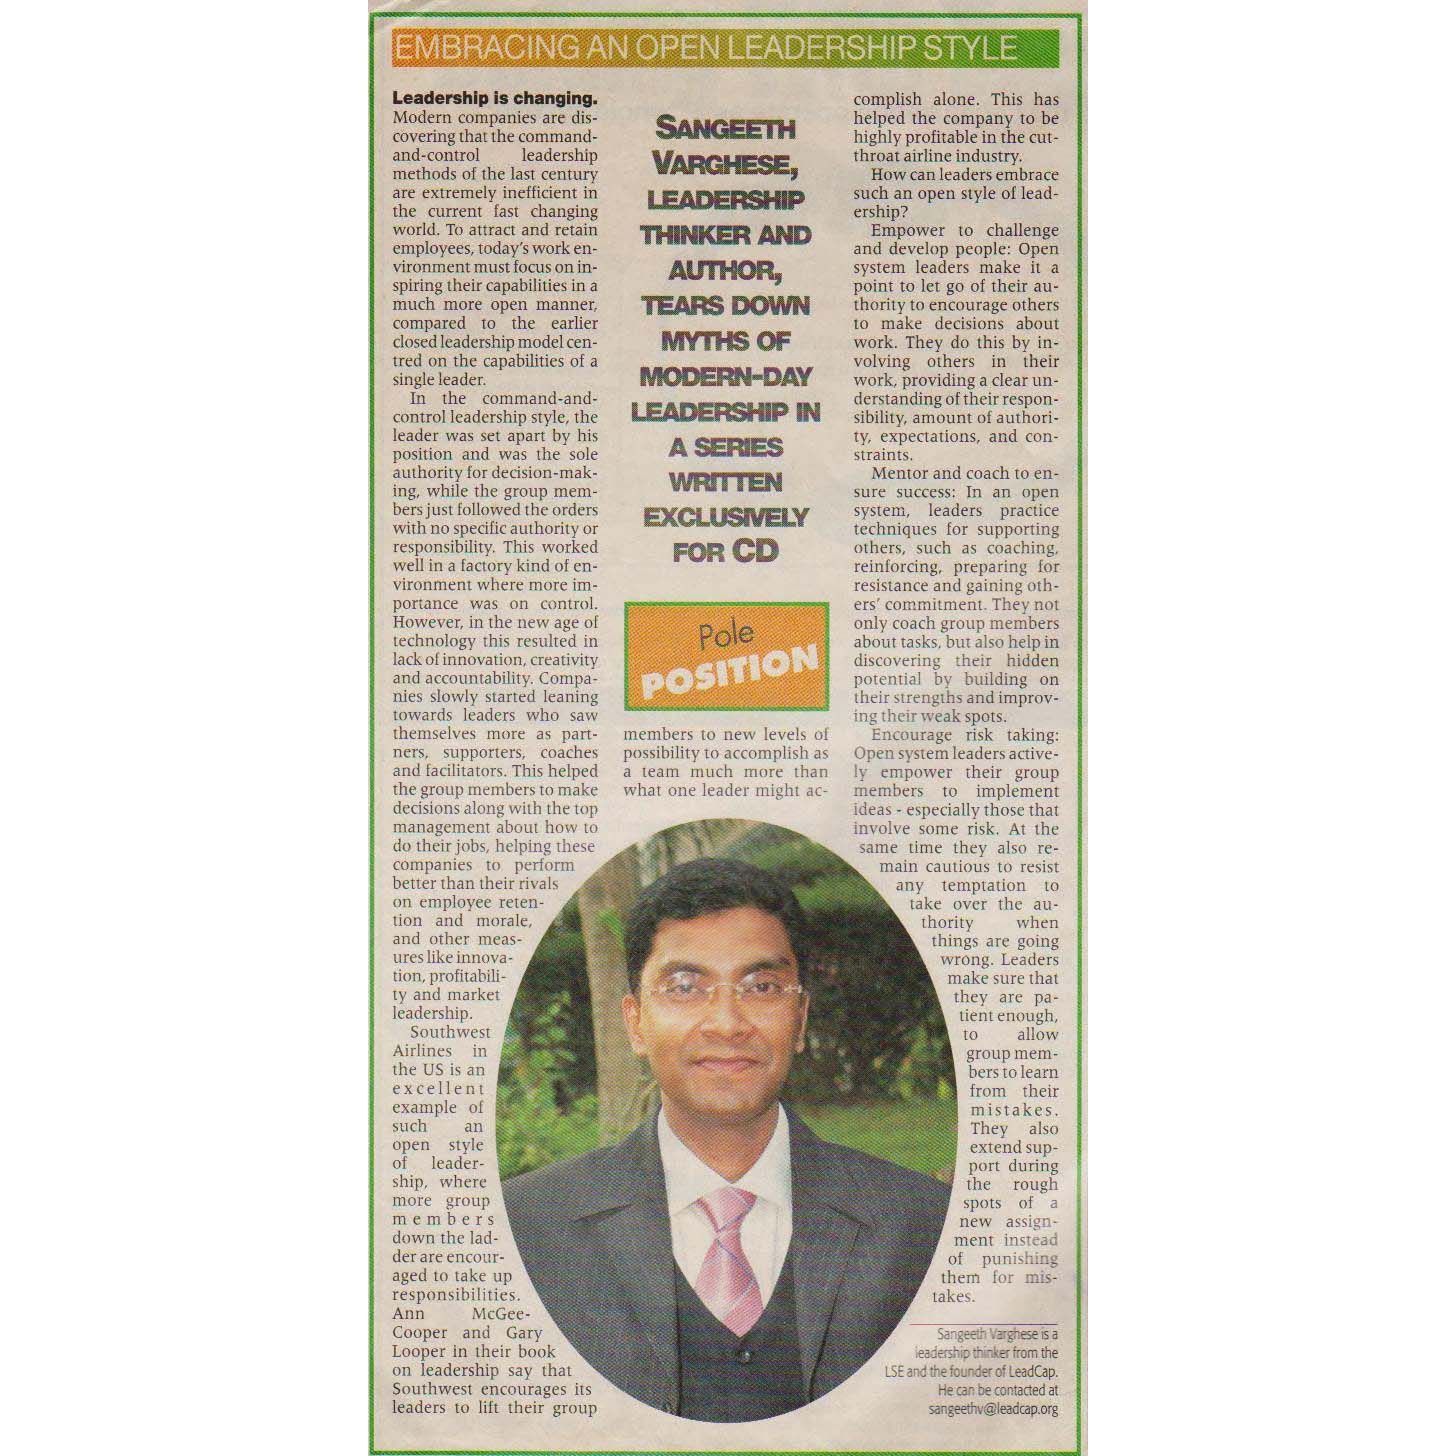 The Economic Times 30 May 2008